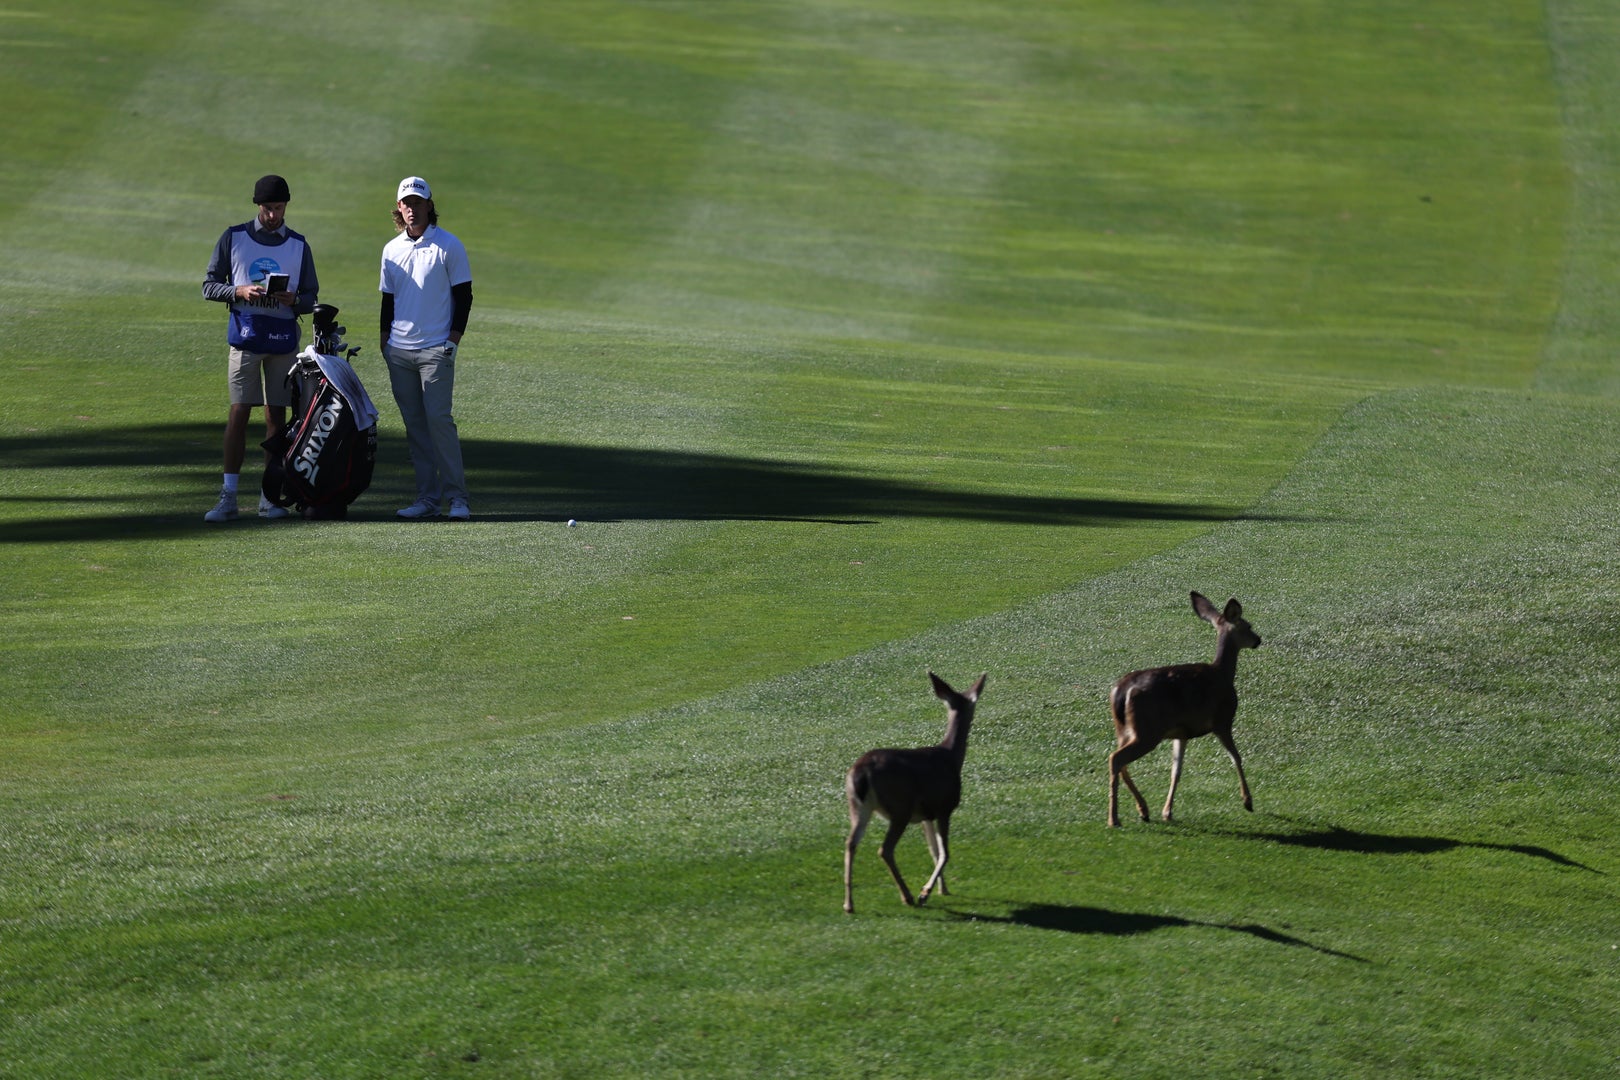 animals on a golf course